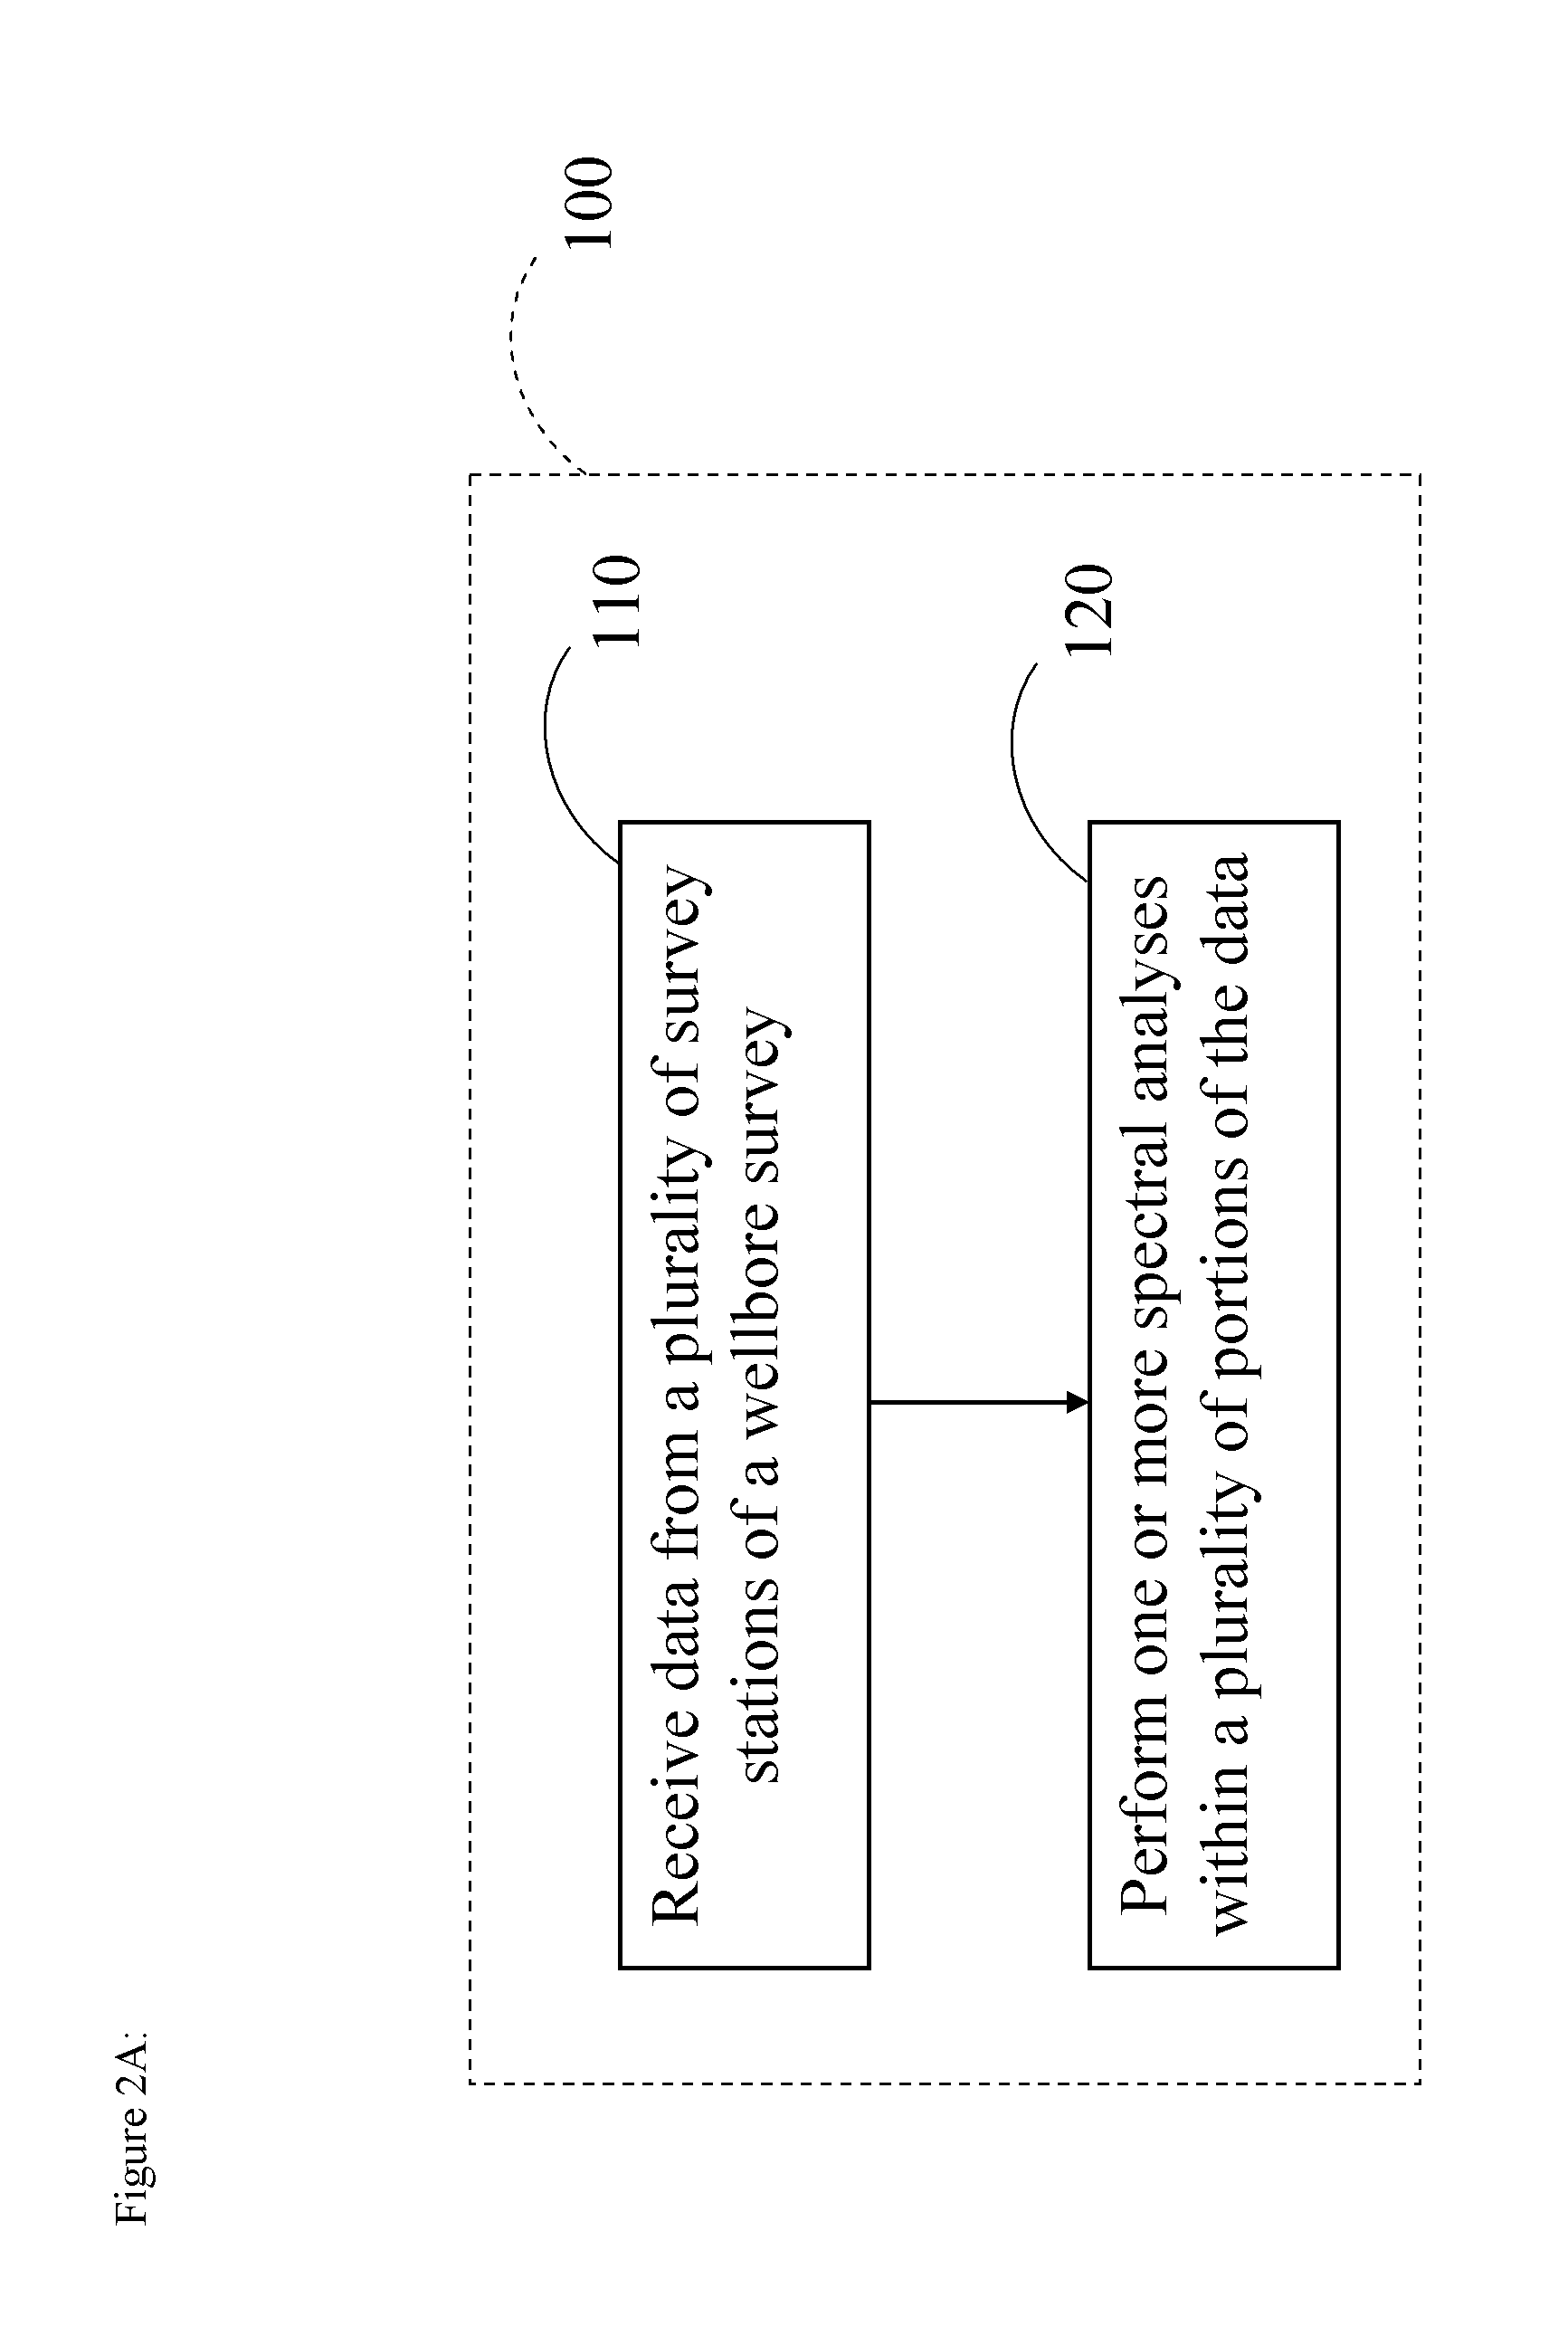 System and method for analyzing wellbore survey data to determine tortuosity of the wellbore using tortuosity parameter values